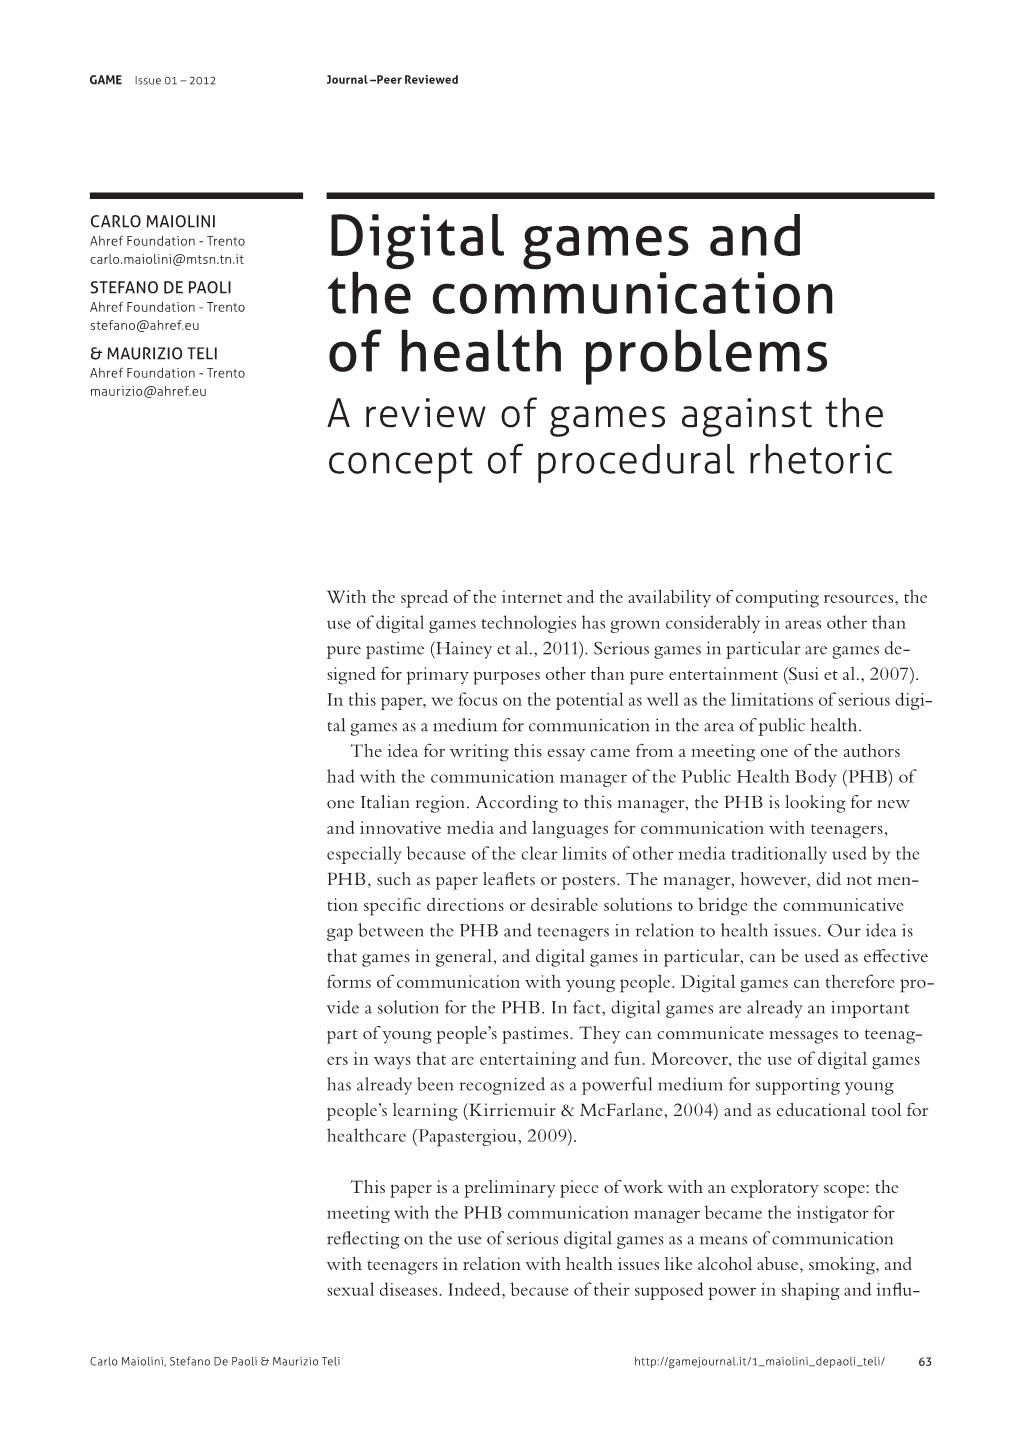 Digital Games and the Communication of Health Problems